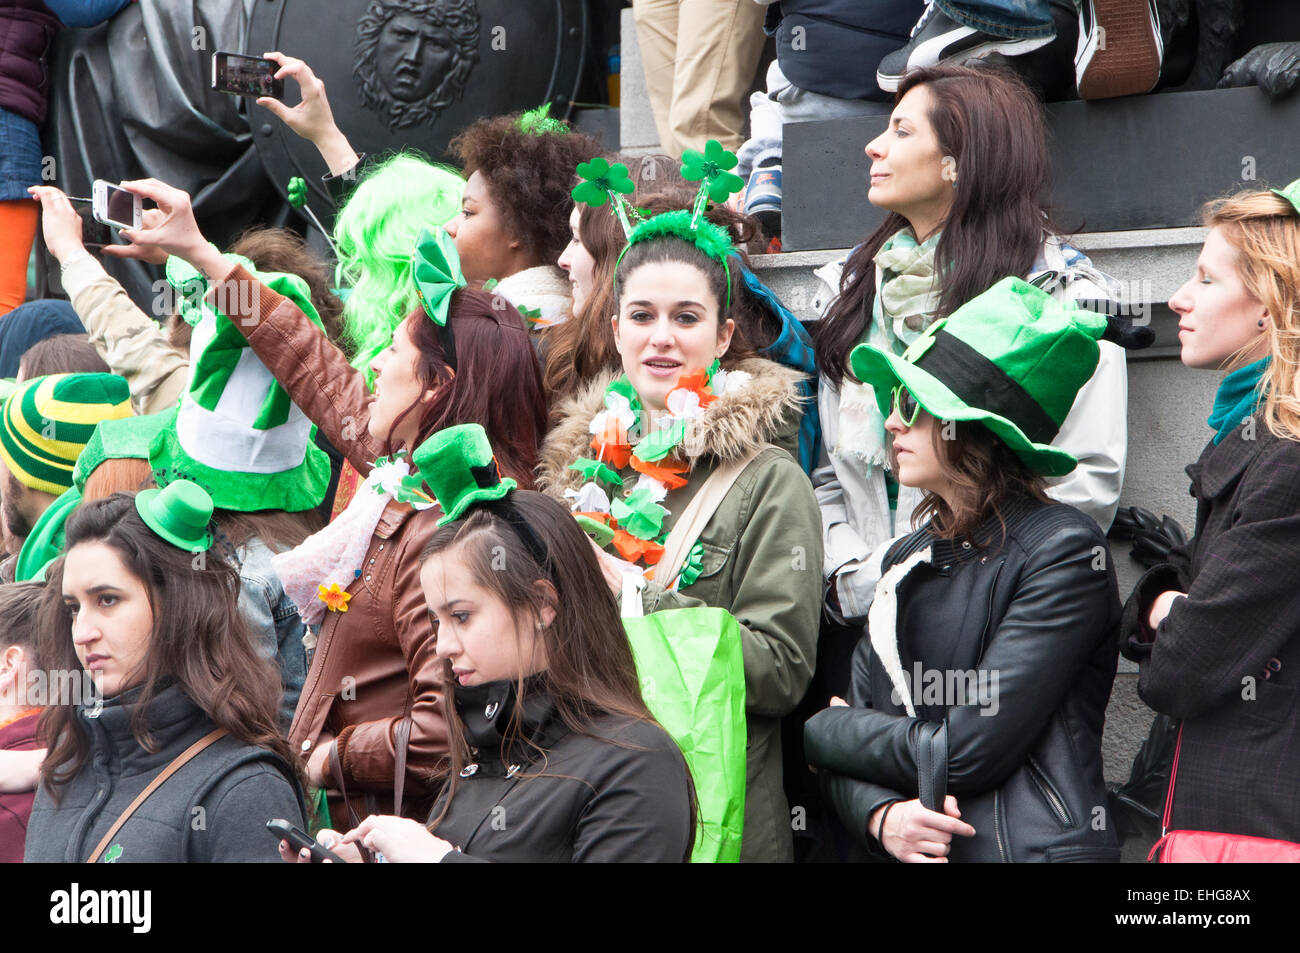 Girl in crowd attending the St Patrick's day festival in O'Connell Street Dublin Ireland wearing green rabbit's ears Stock Photo